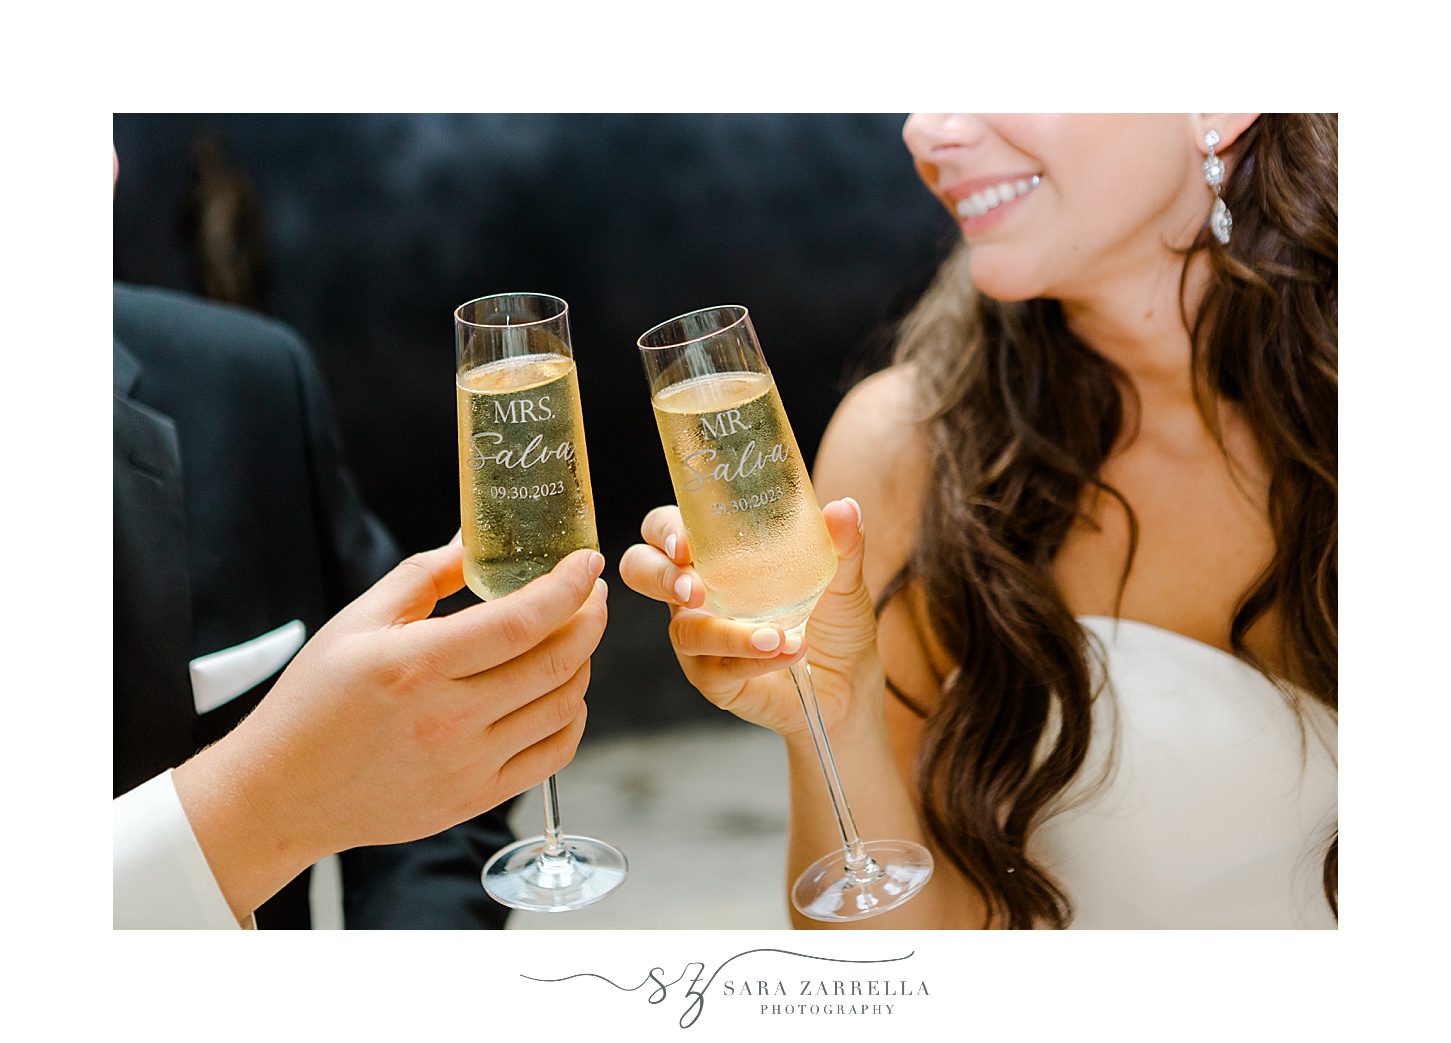 newlyweds tap glasses of champagne together 